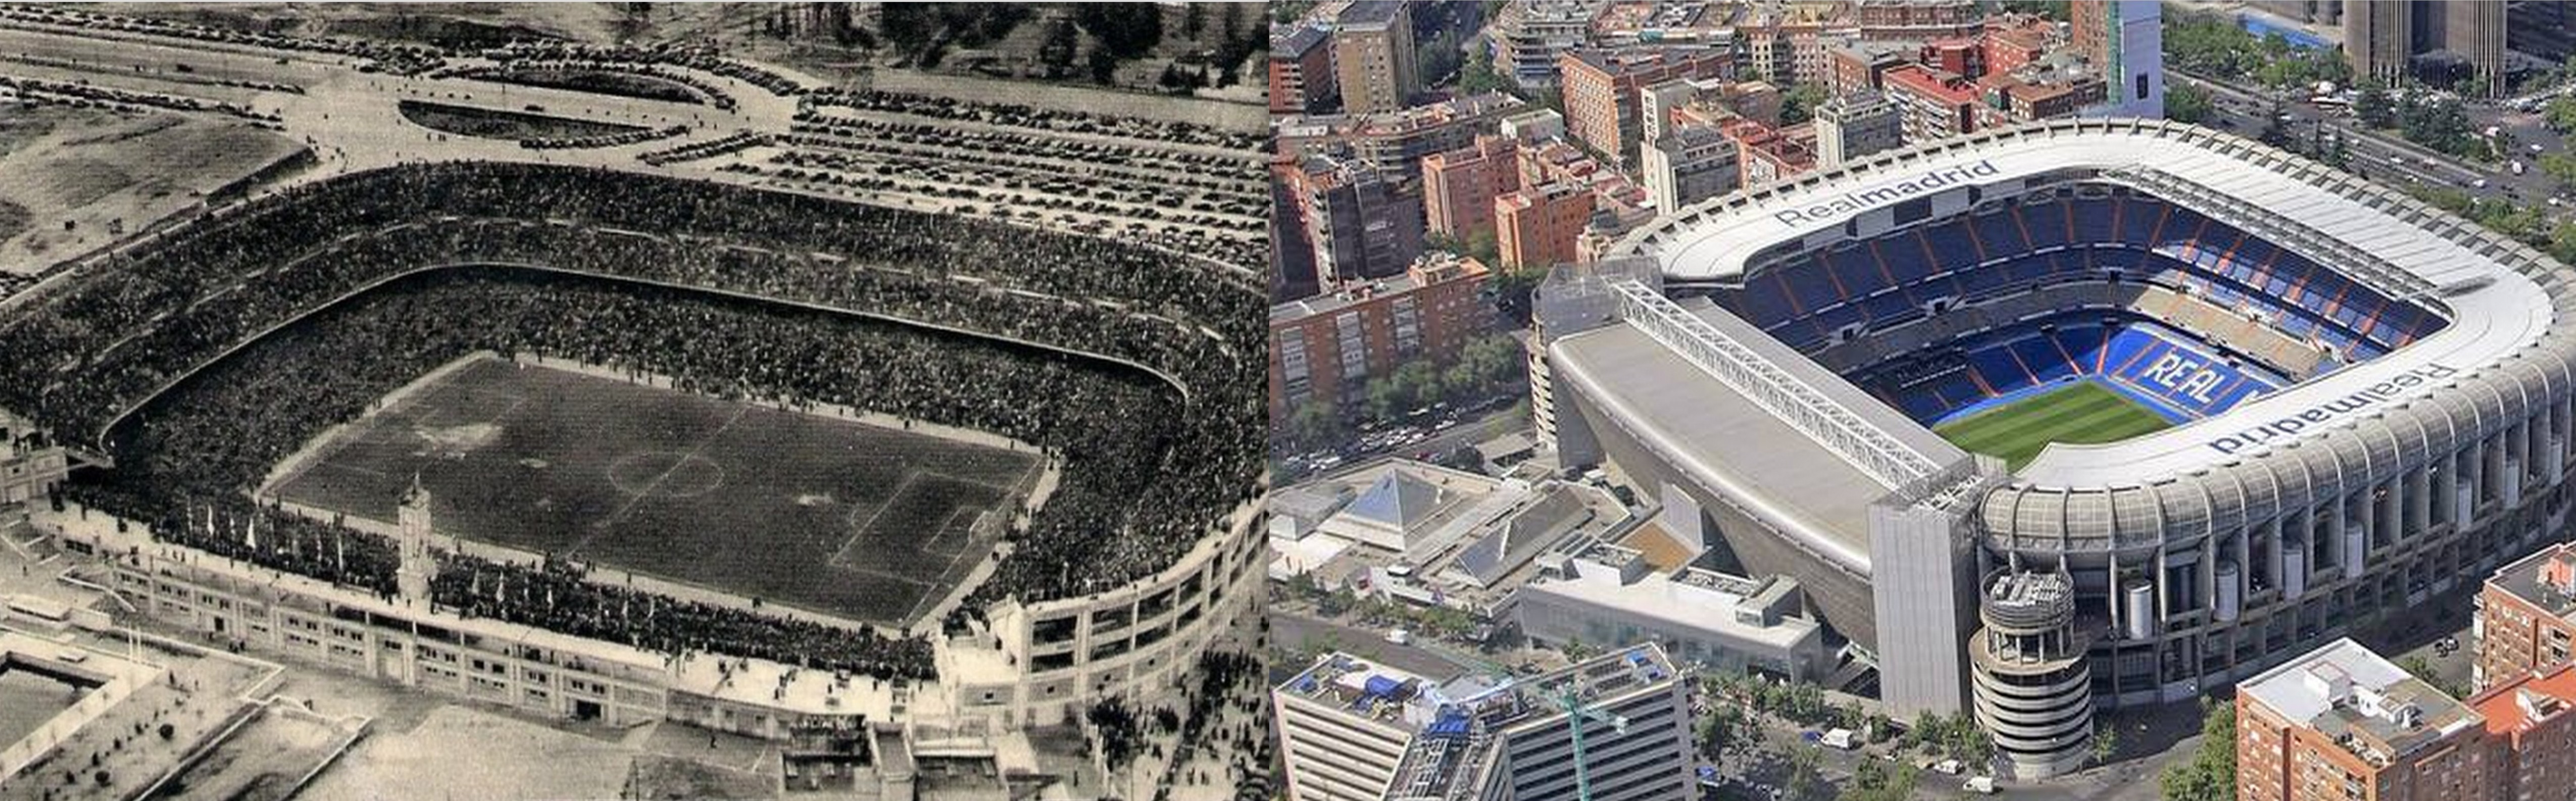 10 iconic football stadiums then and now